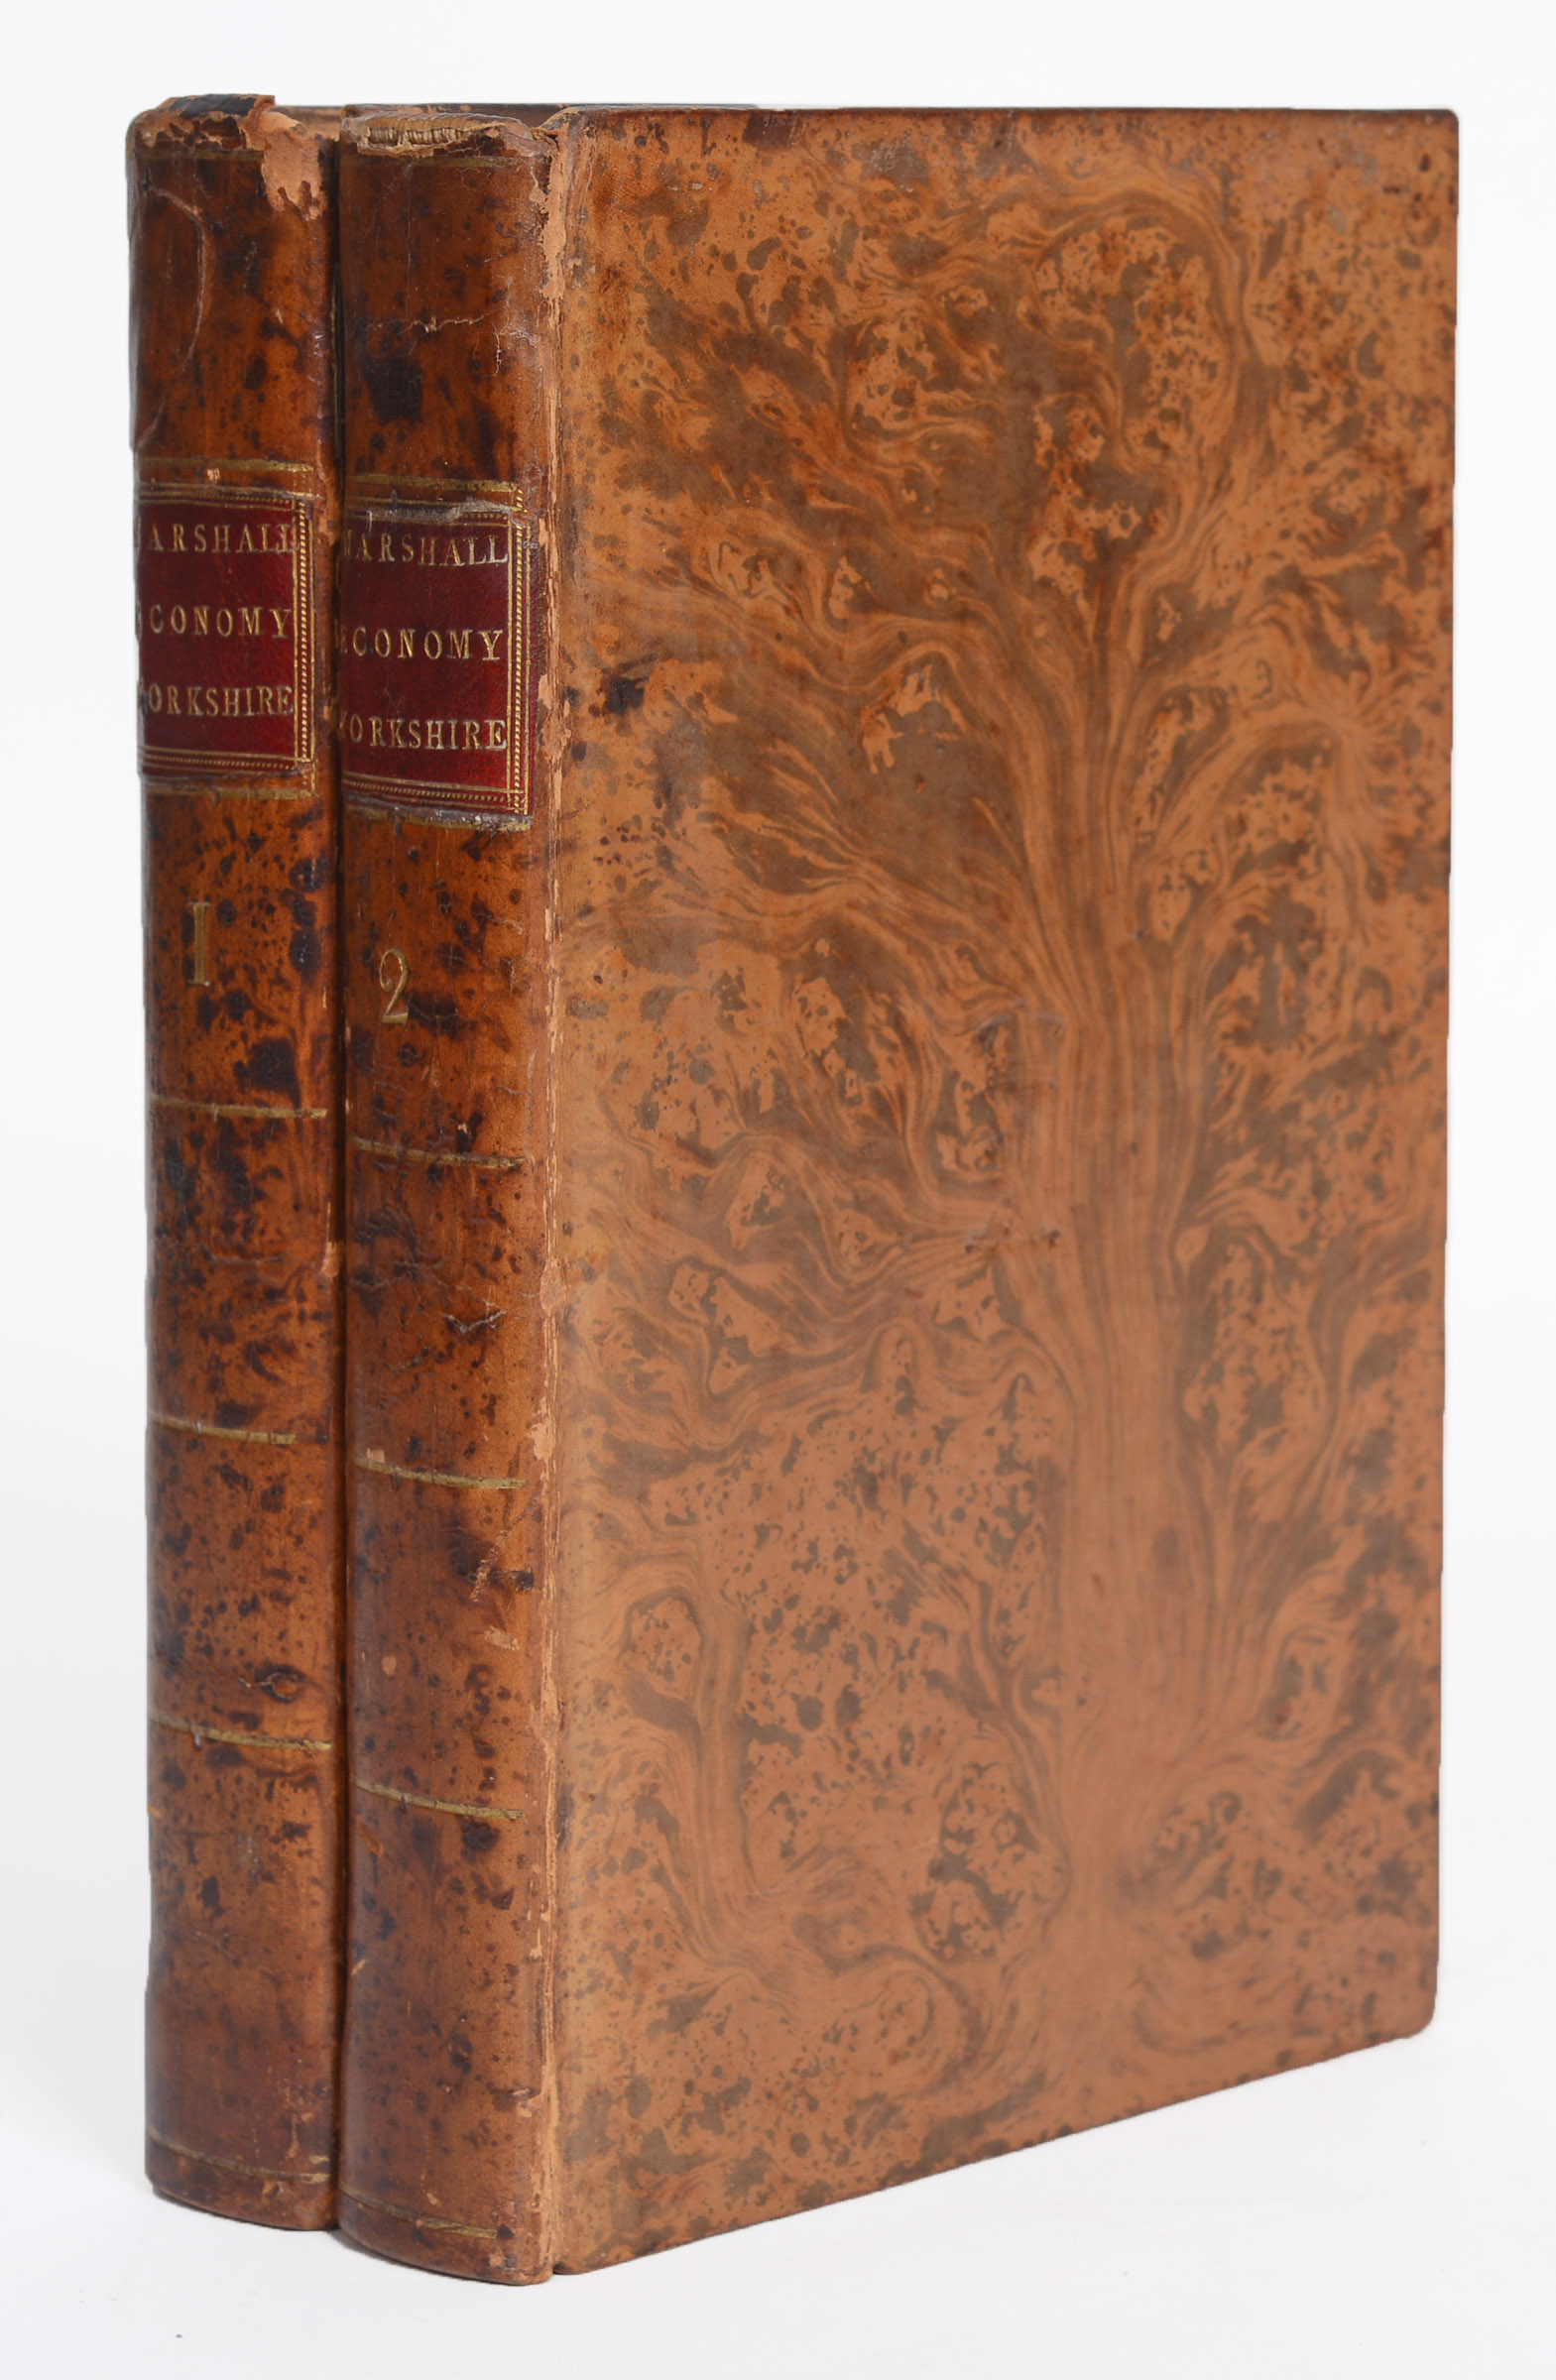 Marshall, William. The Rural Economy of Yorkshire, 2 volumes, first edition, 2 folding engraved